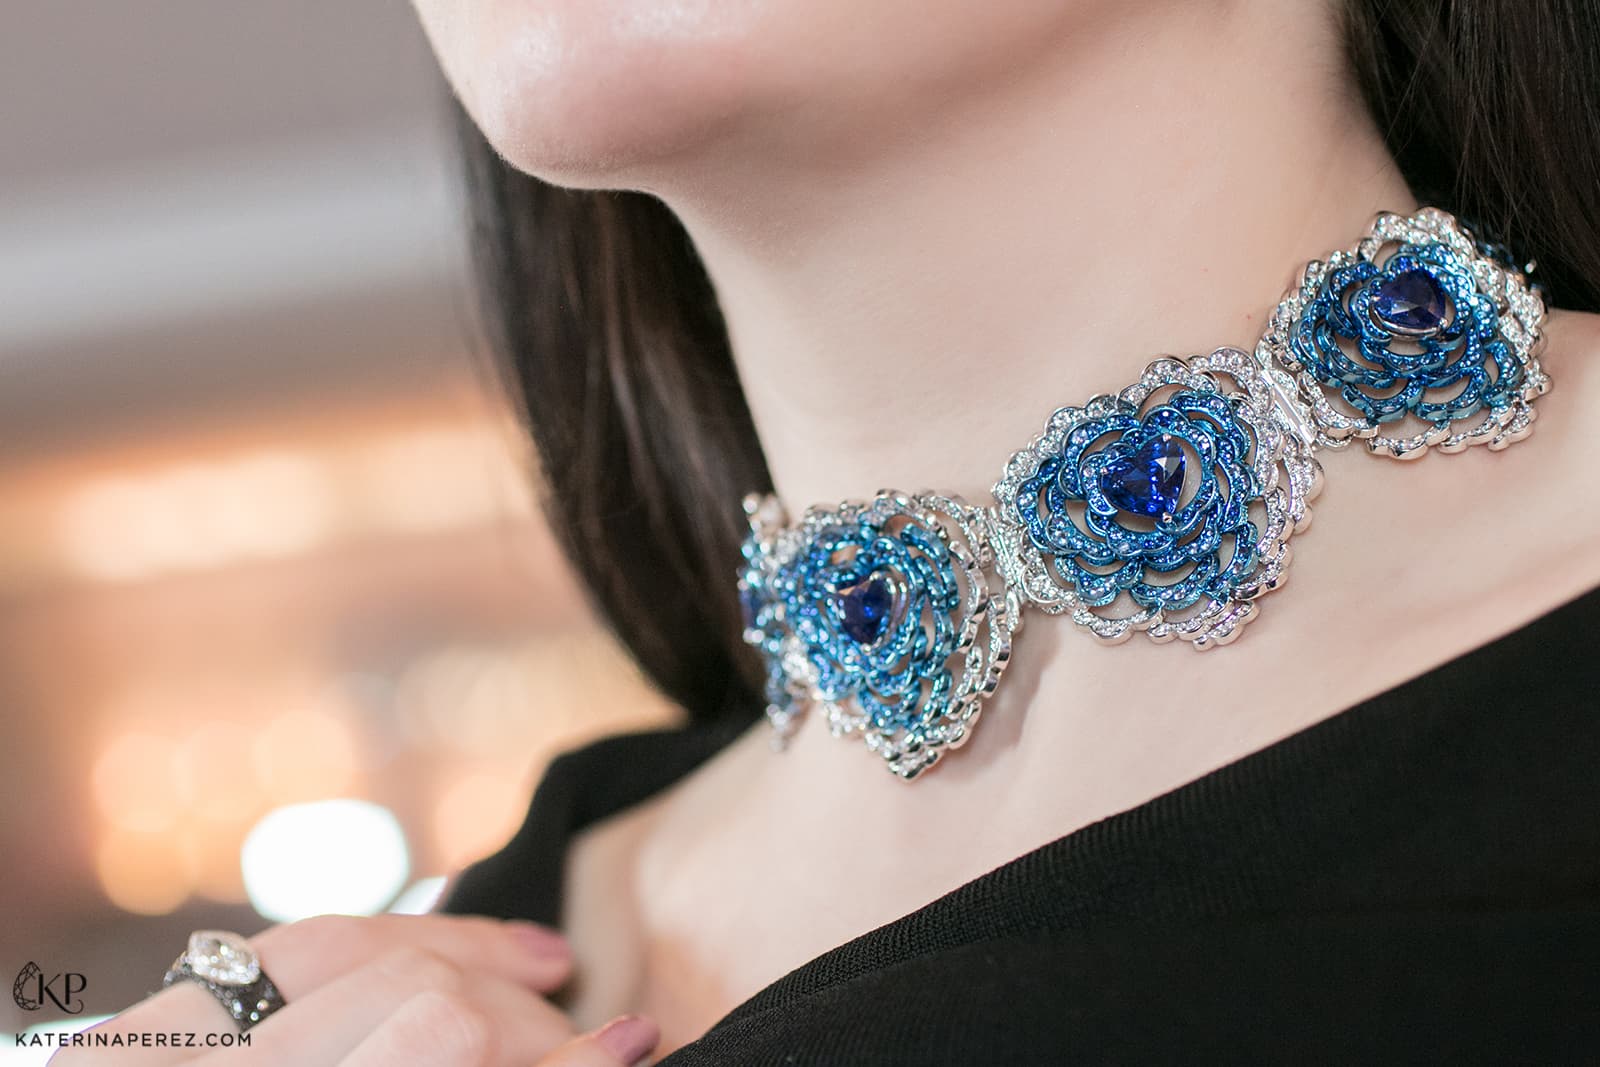 Chopard Red Carpet 2019 collection choker with heart shaped tanzanites. Paraiba tourmaline and diamonds in titanium and white gold